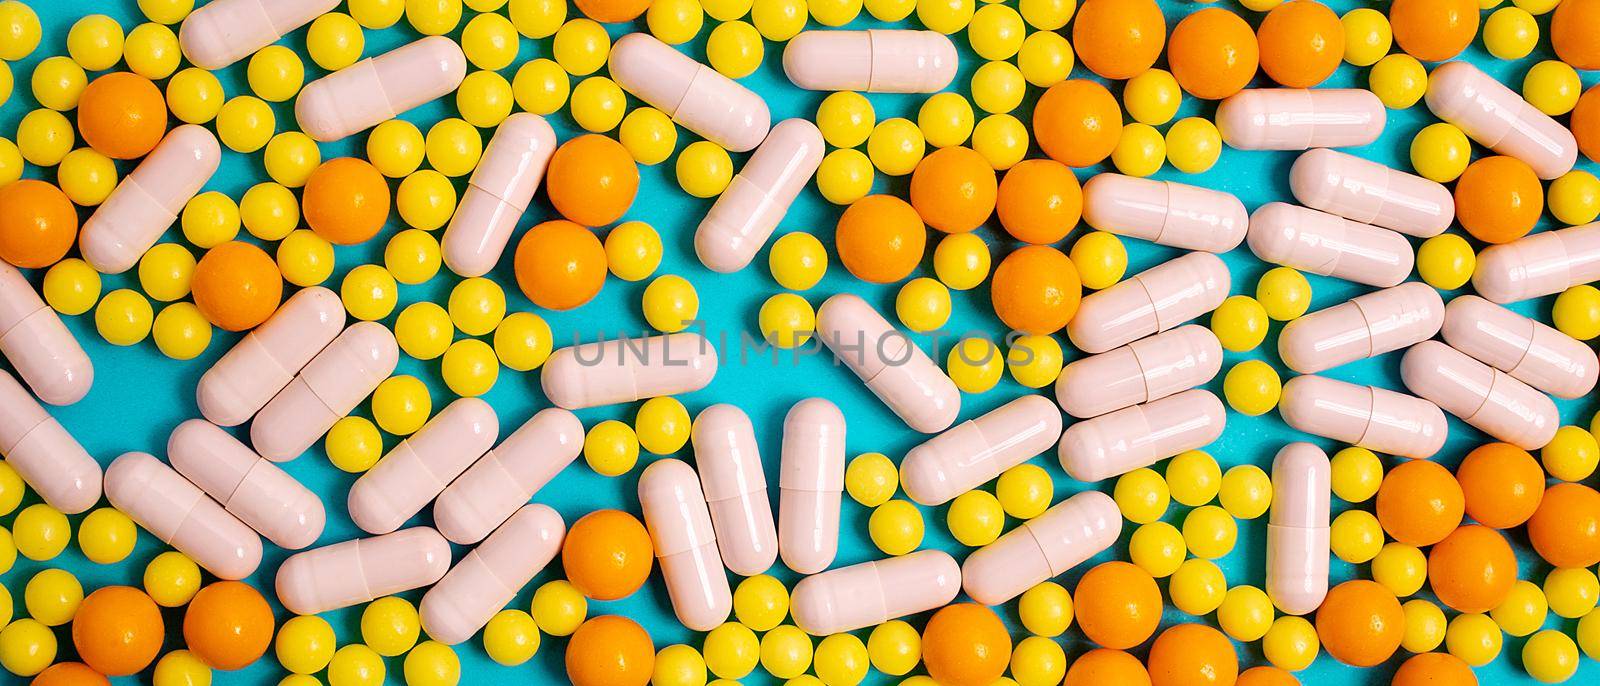 different colorful and white pills, capsules. Prevention, cure of influenza, coronavirus, covid-19. yellow, orange vitamins, tablets on blue background. medical healthcare, protection concept banner